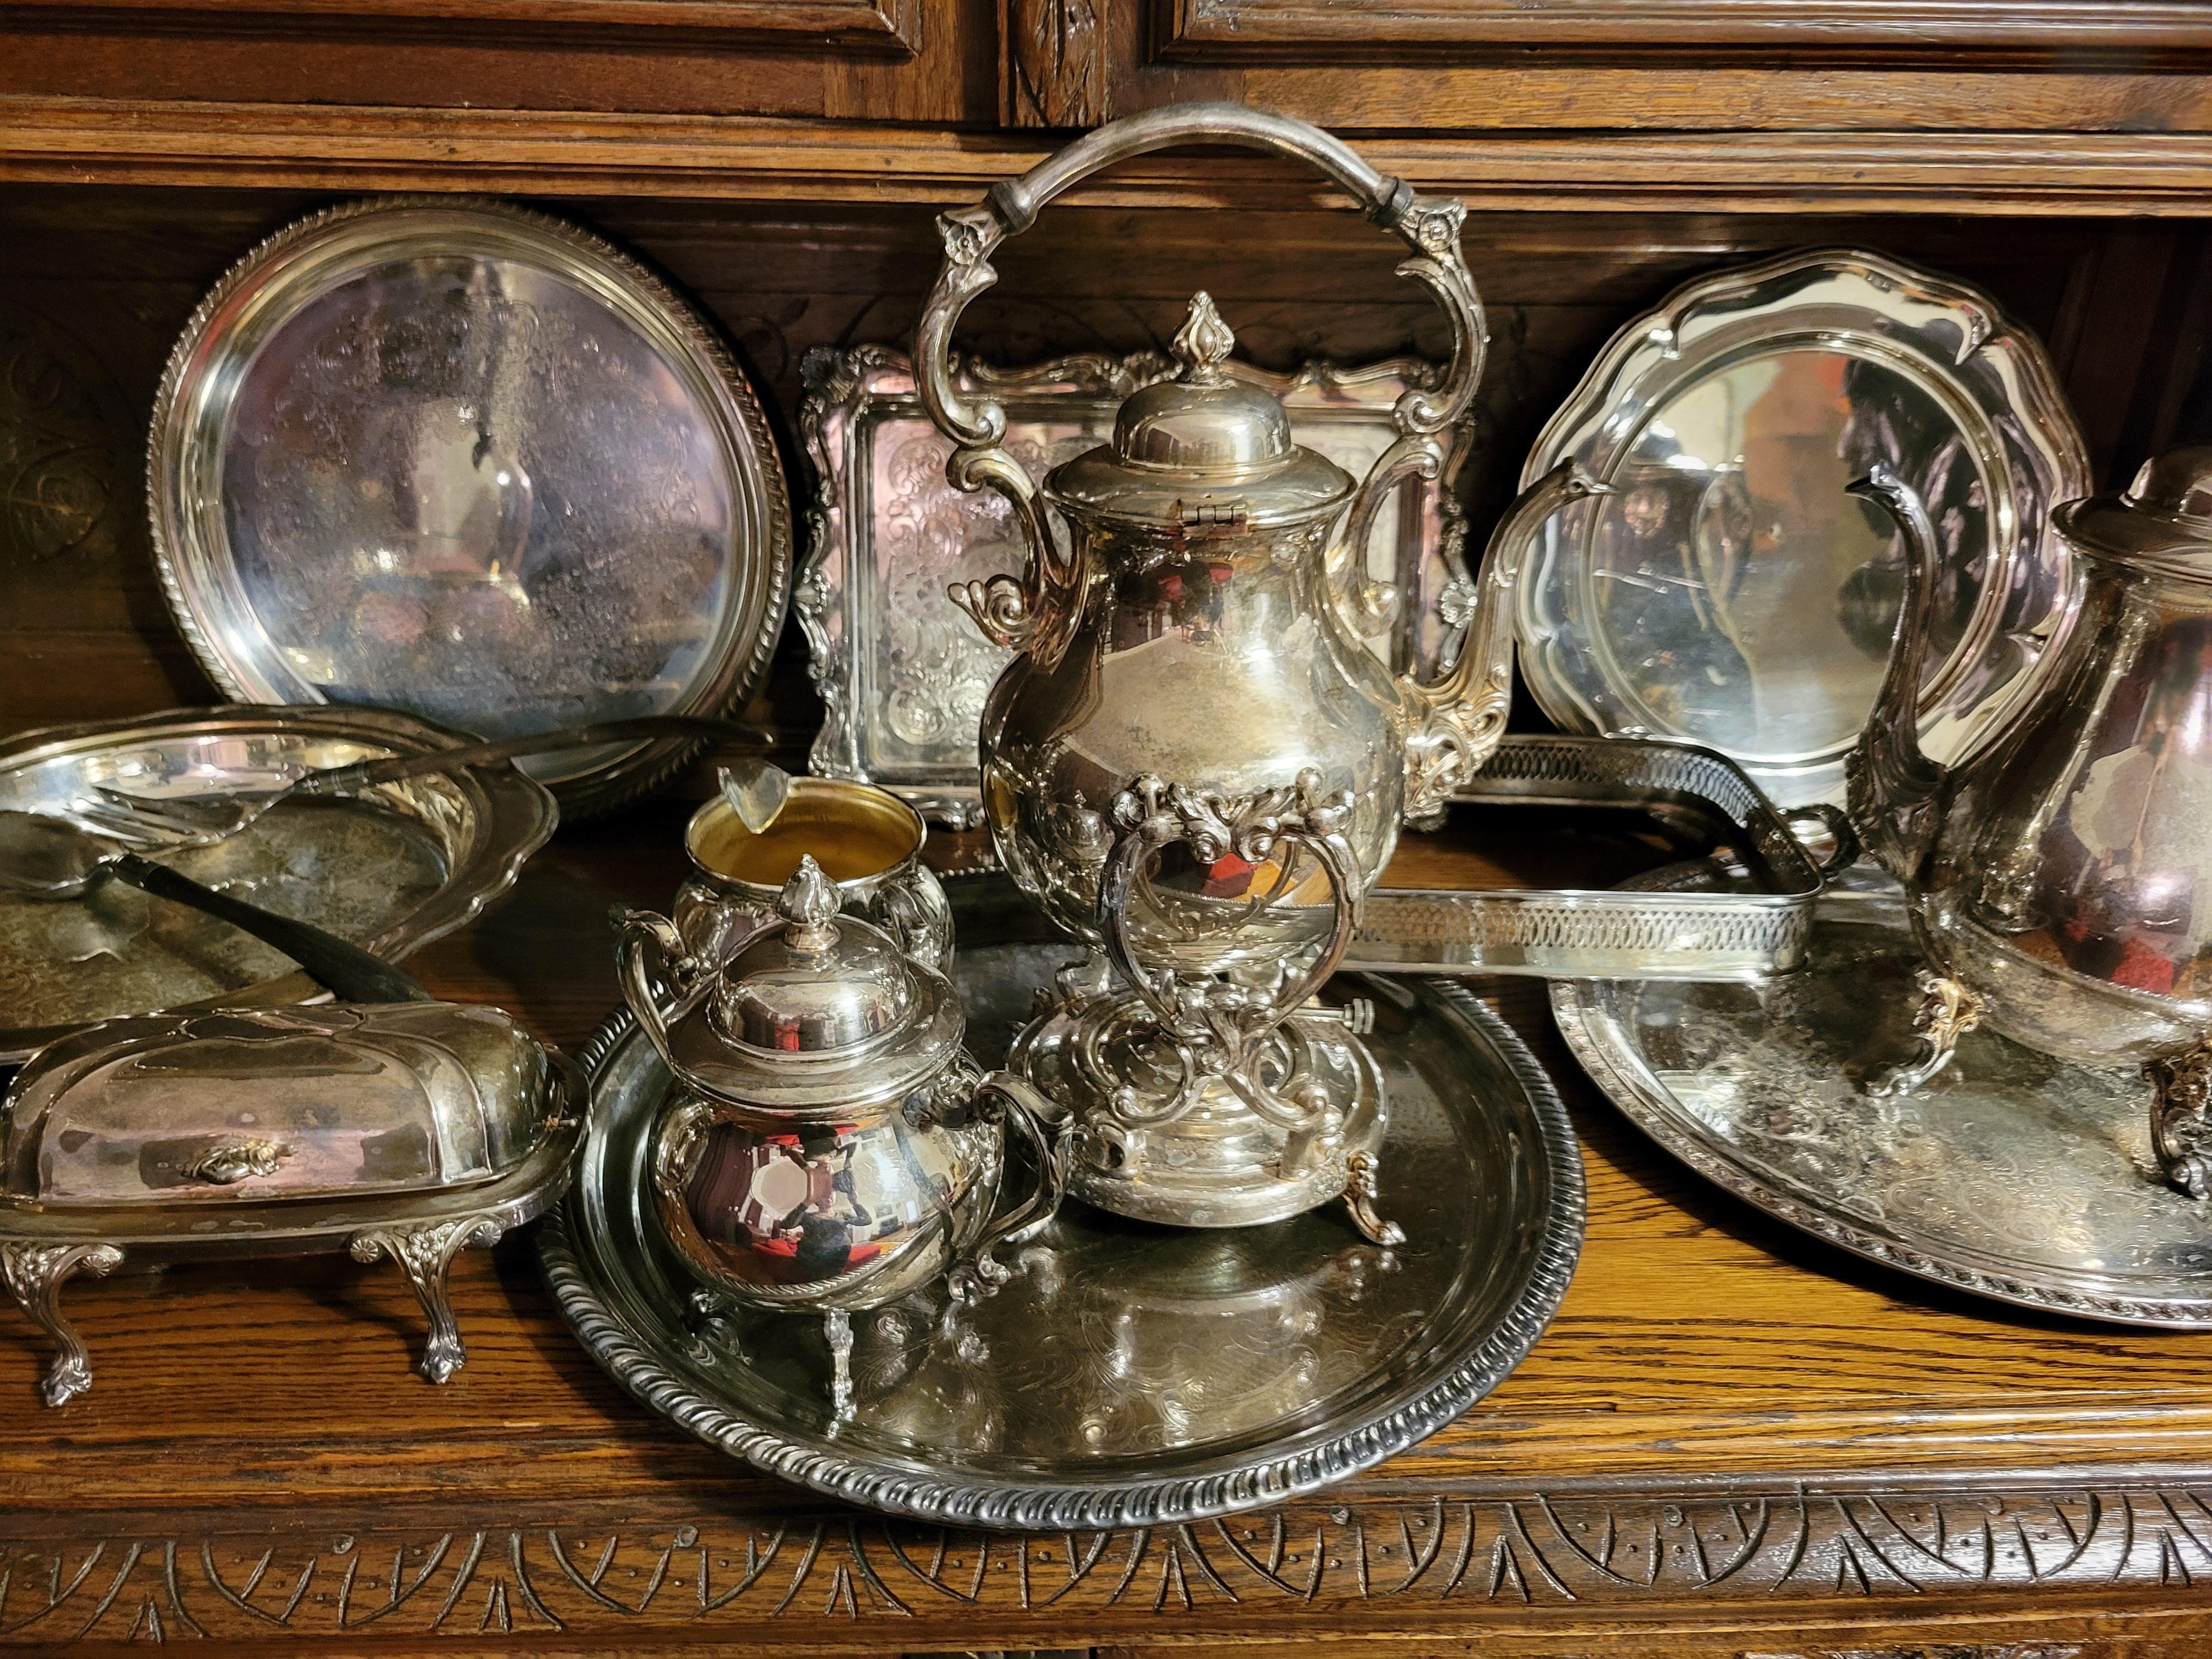 Vintage silver plated serving set. 
The set includes:
(1) Square Tray - 14